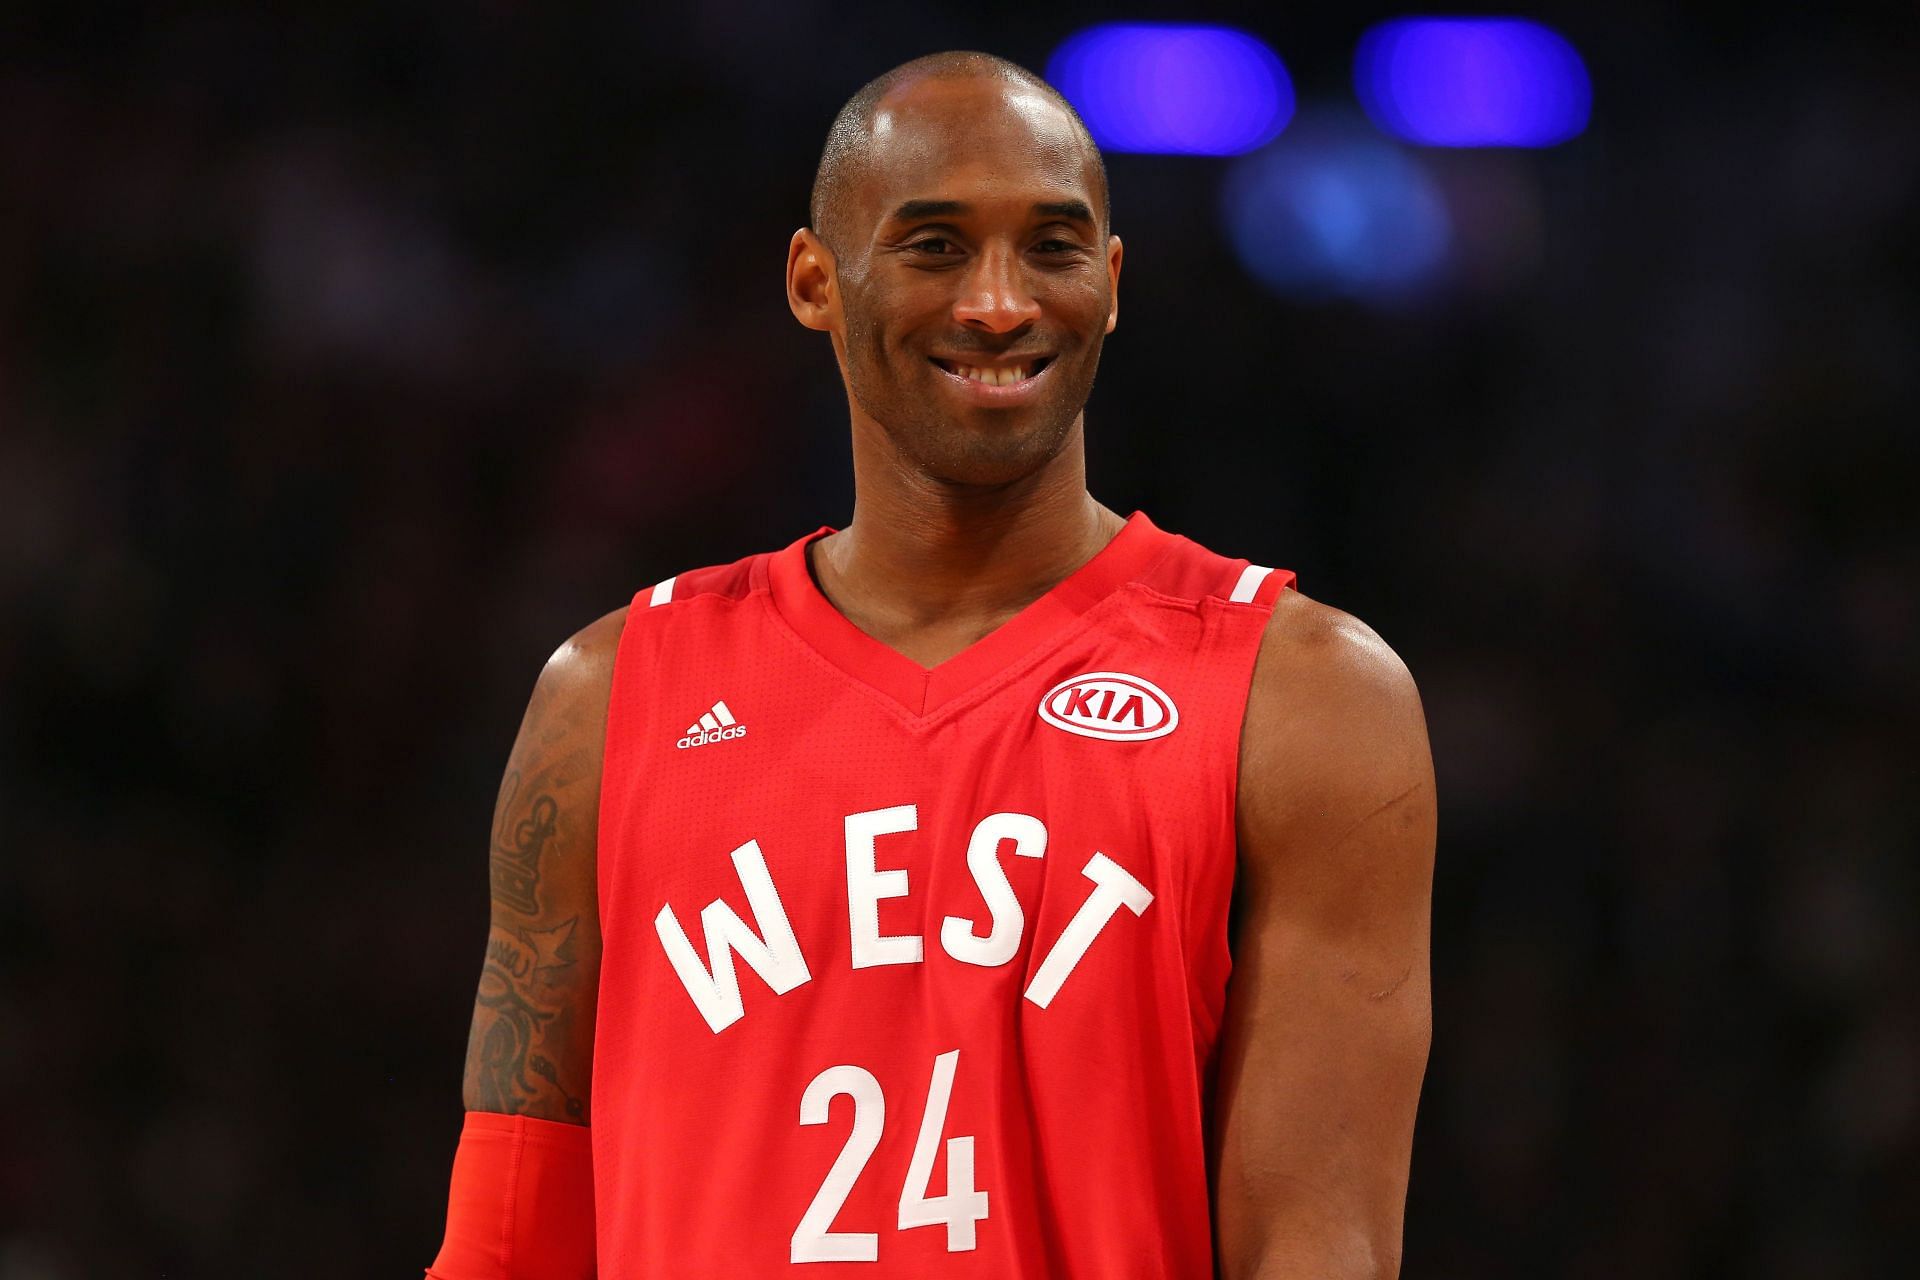 Kobe Bryant at the NBA All-Star Game in 2016